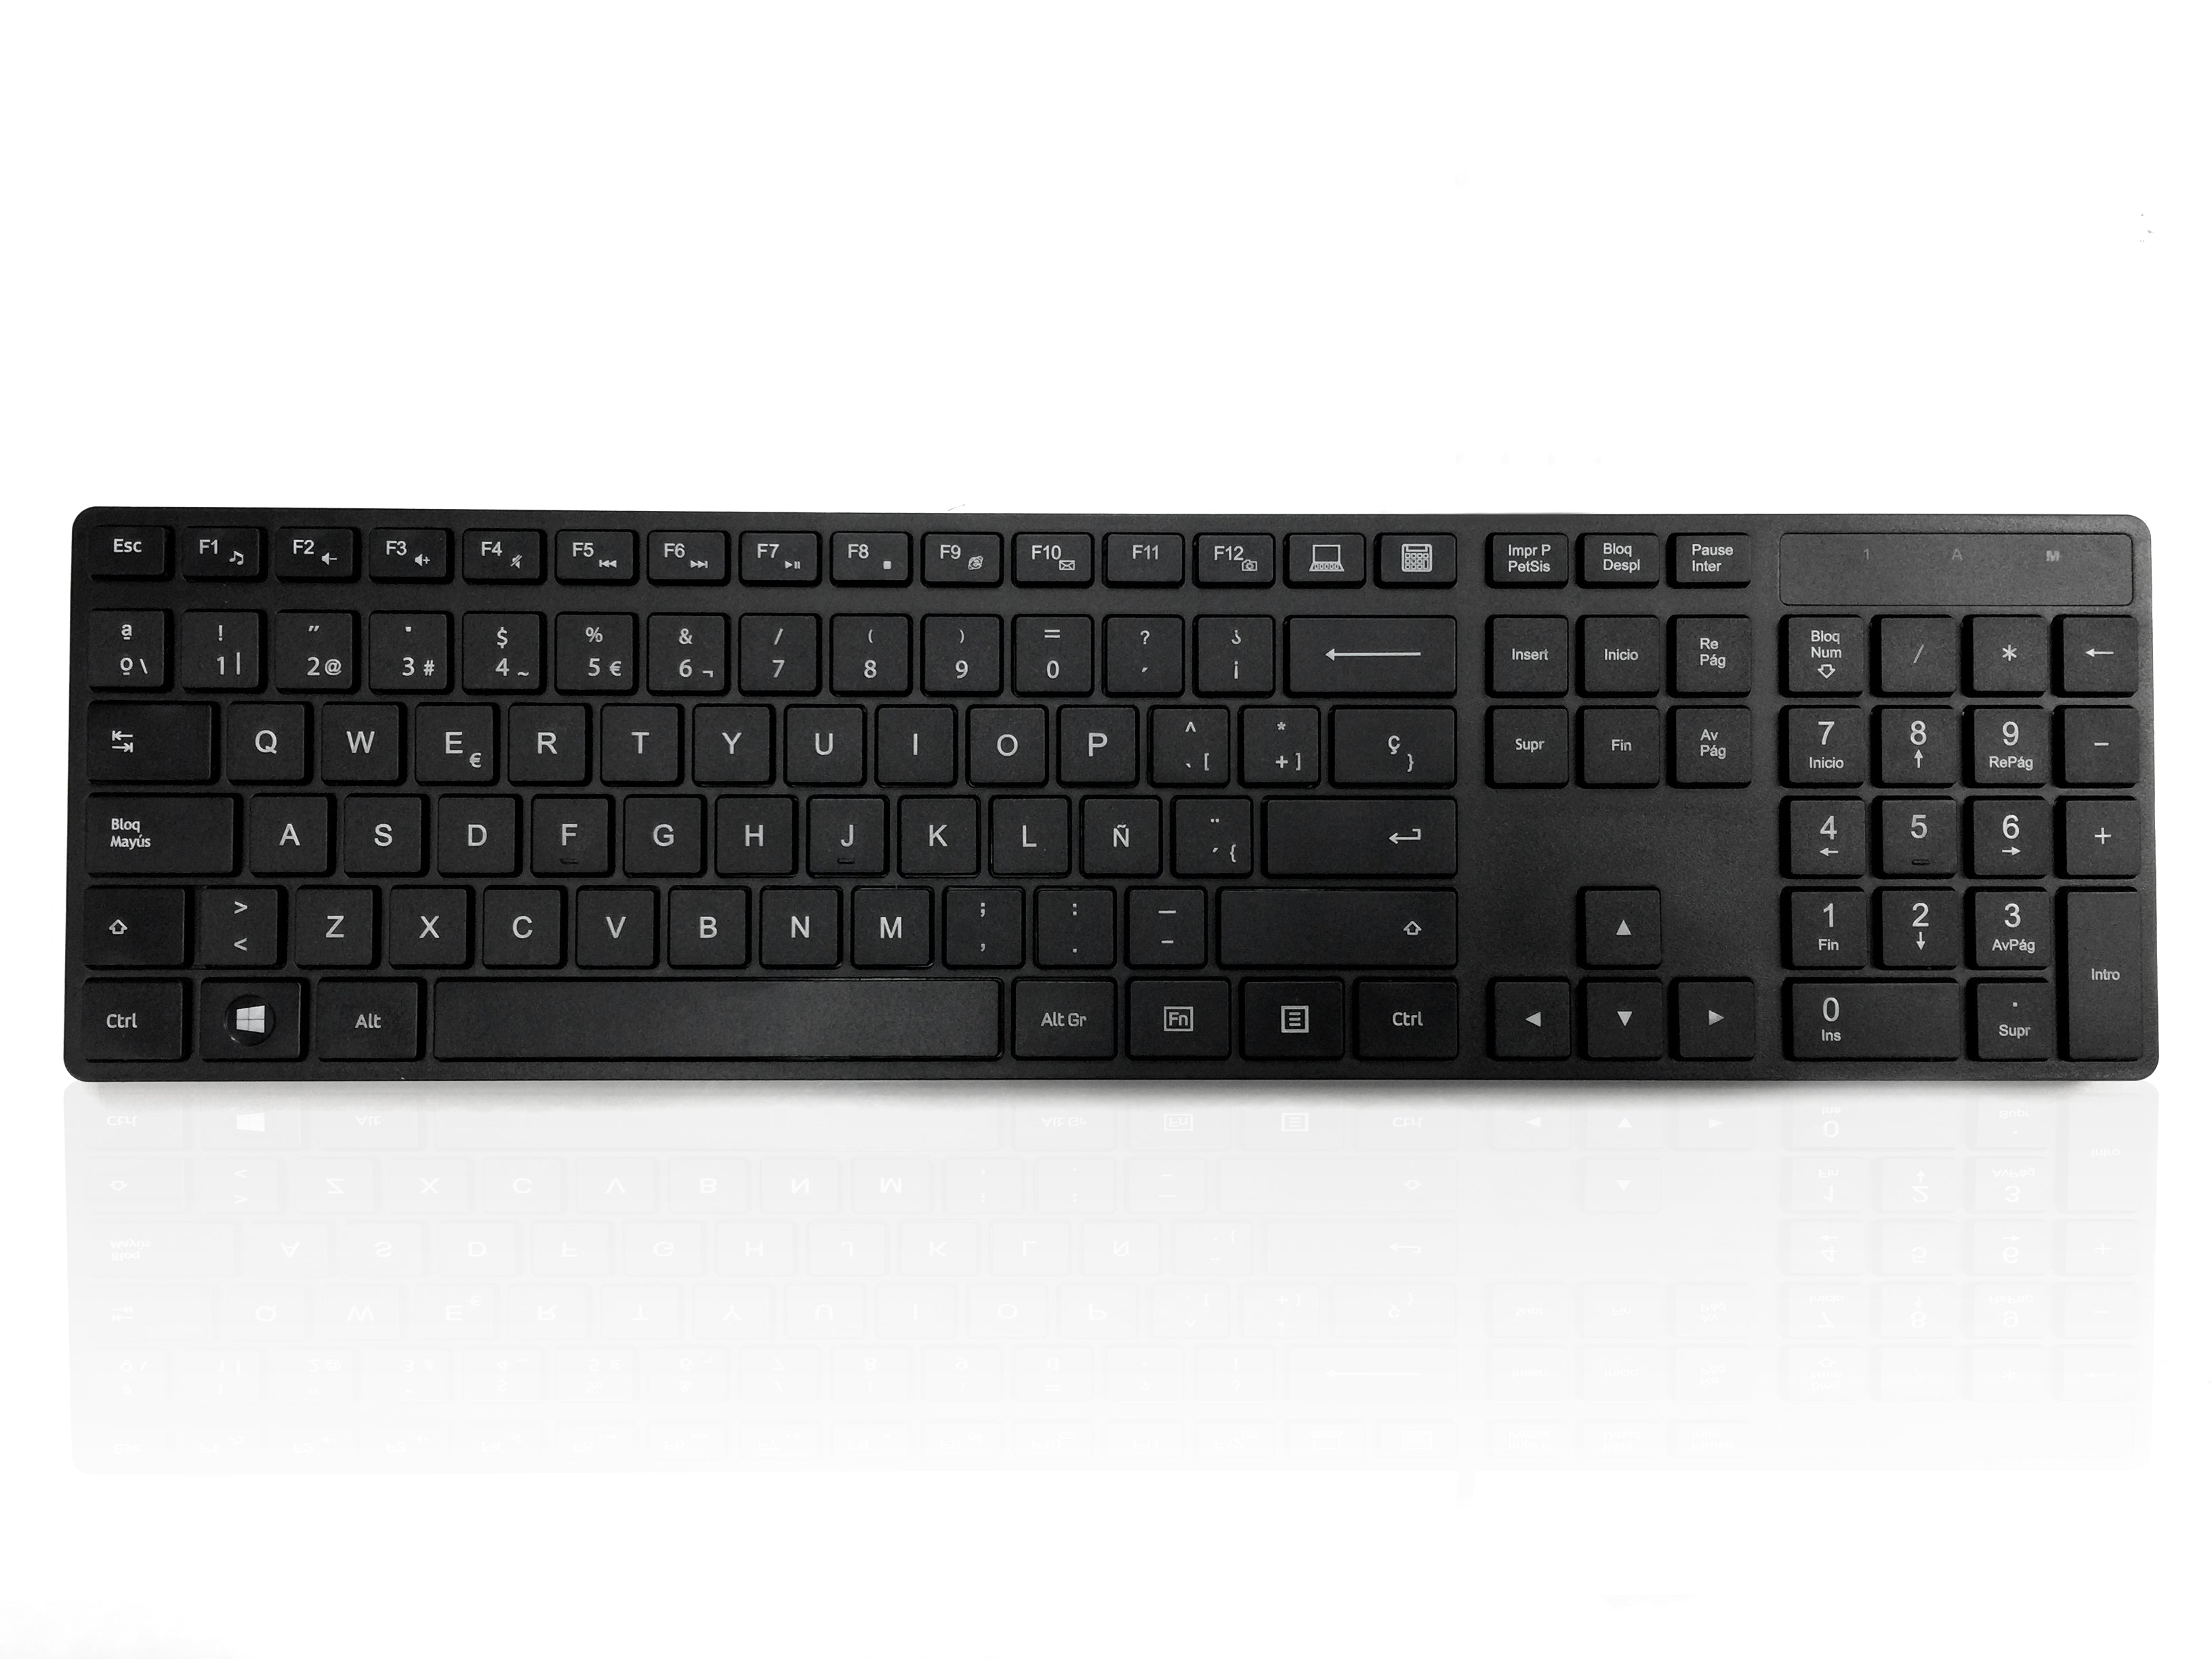 Accuratus 301 - PS/2 Full Size Super Slim Multimedia Keyboard with Square Modern Keys in Black